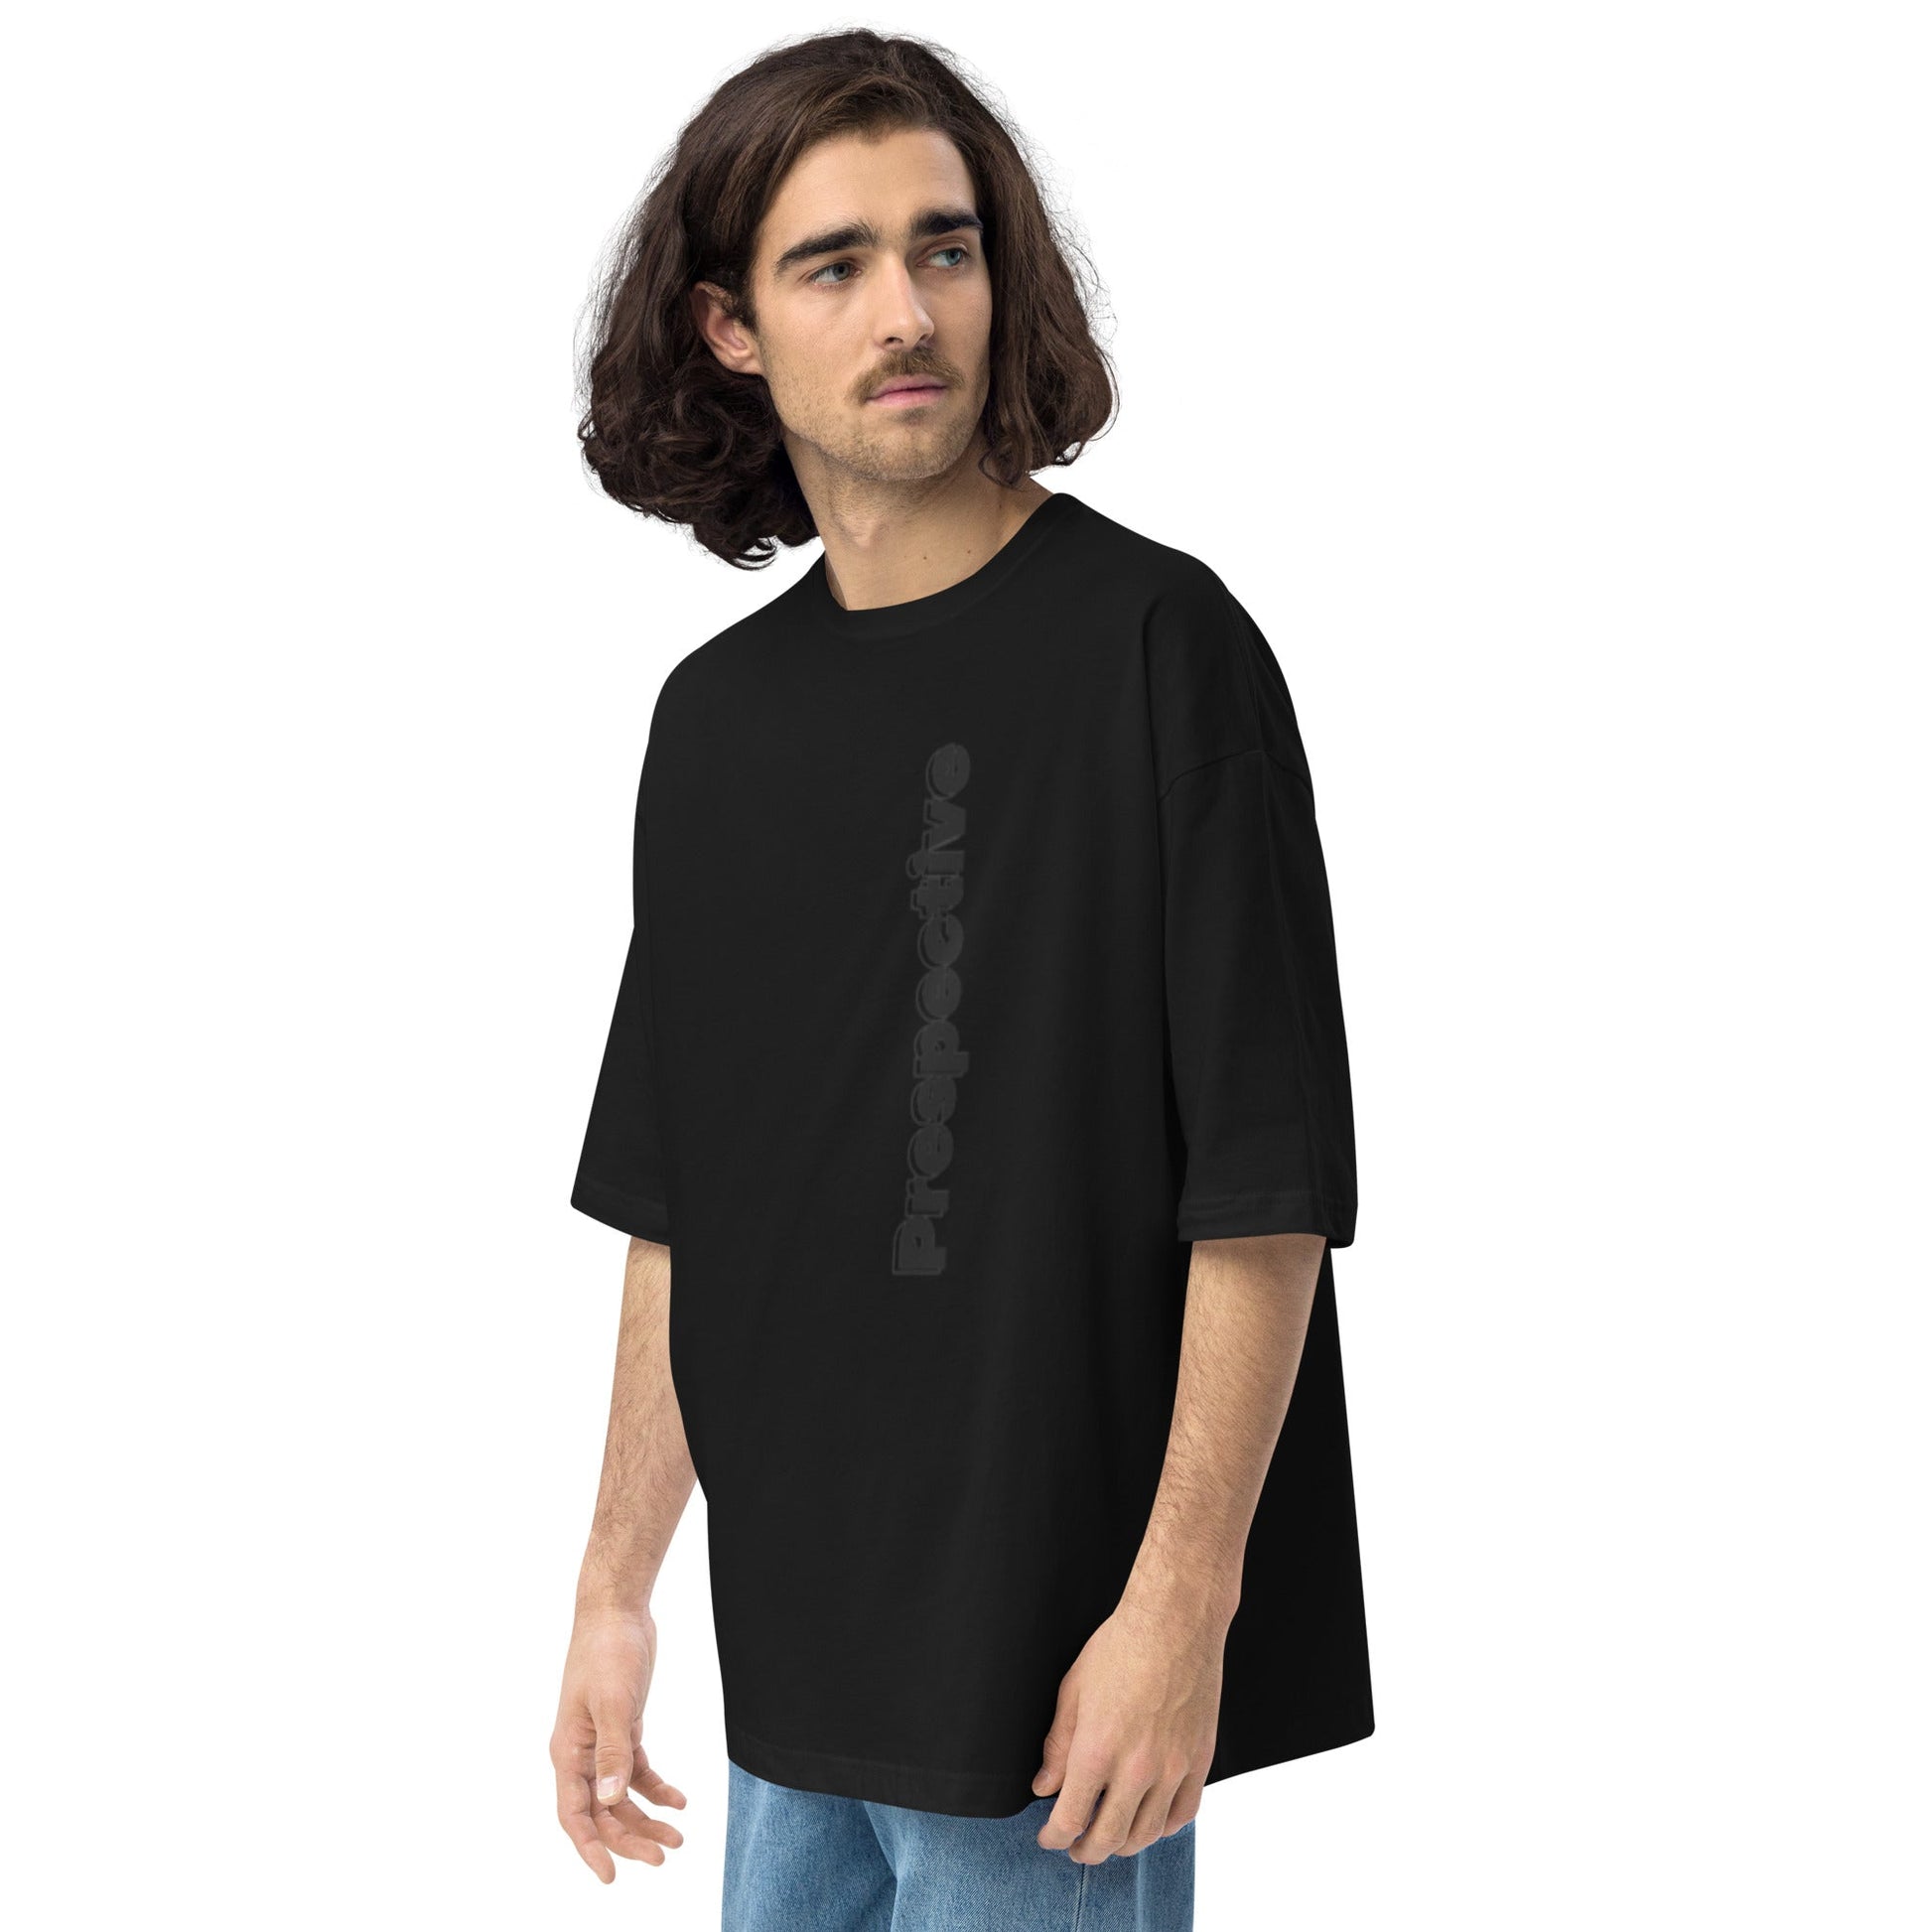 Get trendy with BlackMars oversized t-shirt -  available at BlackMars . Grab yours for £28.50 today!